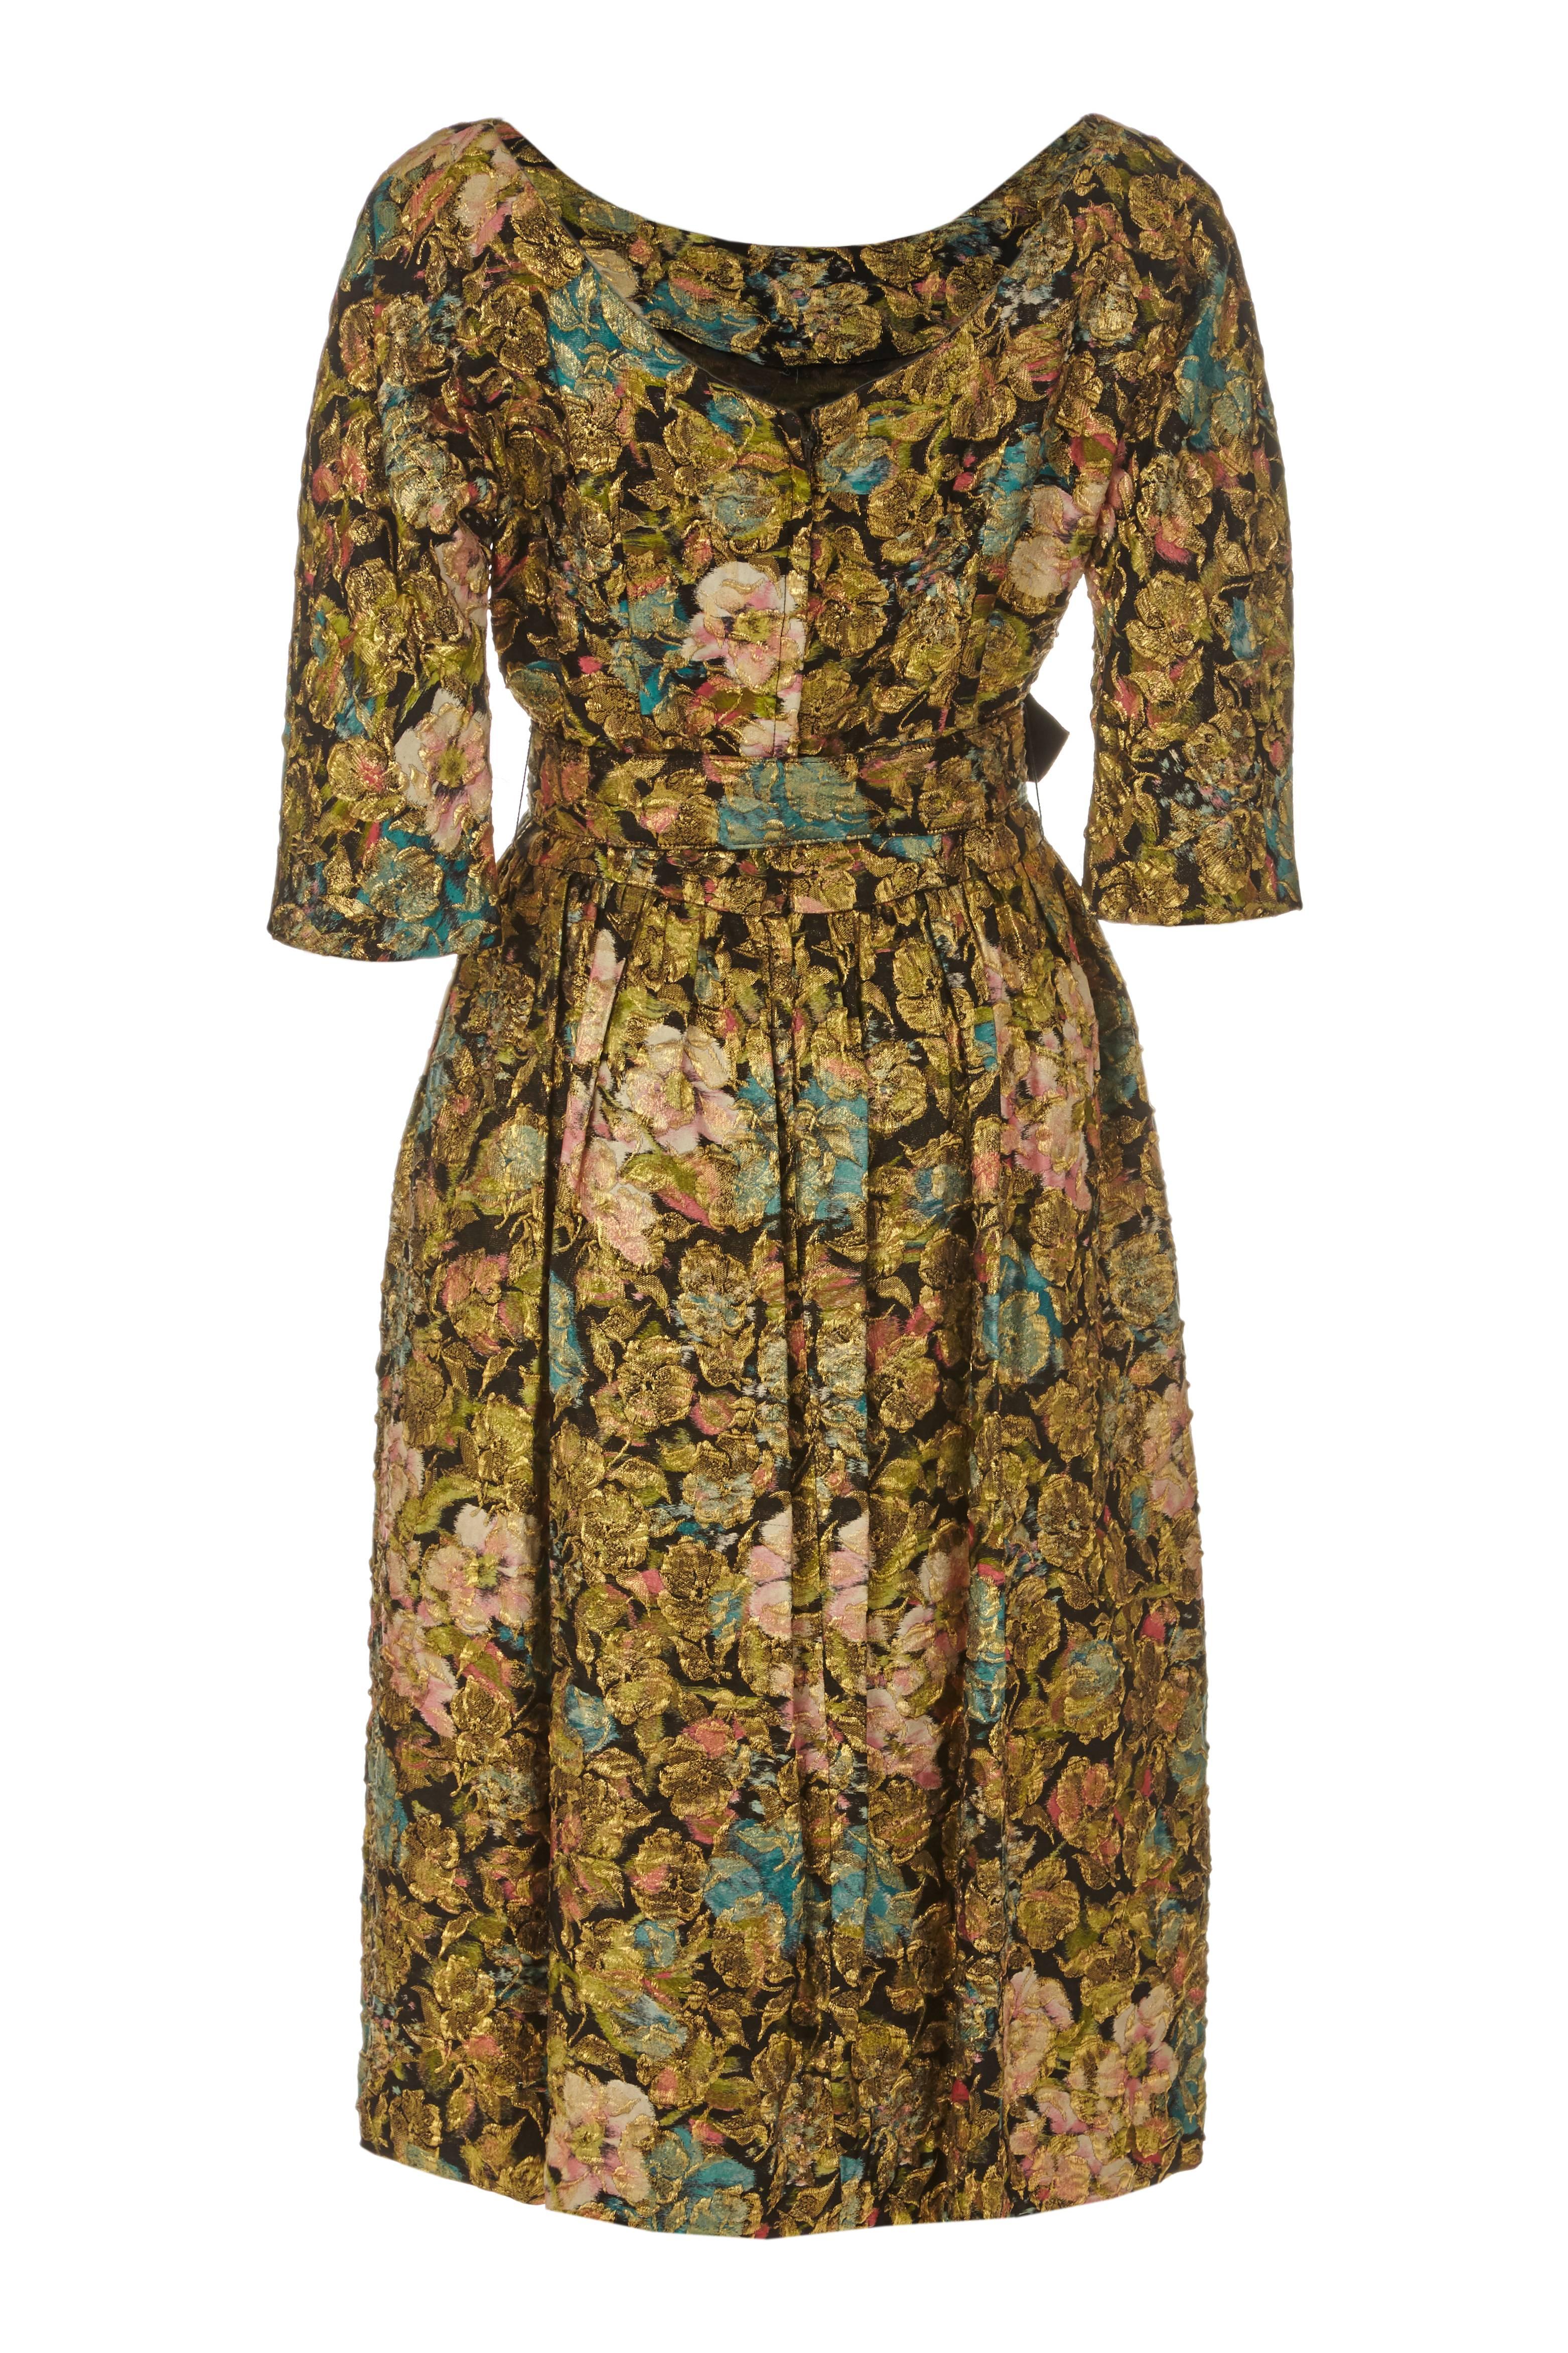 Amazing 1950s vintage dress from American label Suzy Perrette with black, blue and pink floral print and textured gold lame pattern woven throughout the silk giving a very luxurious feel. This piece features 3/4 sleeves, low scoop back and original